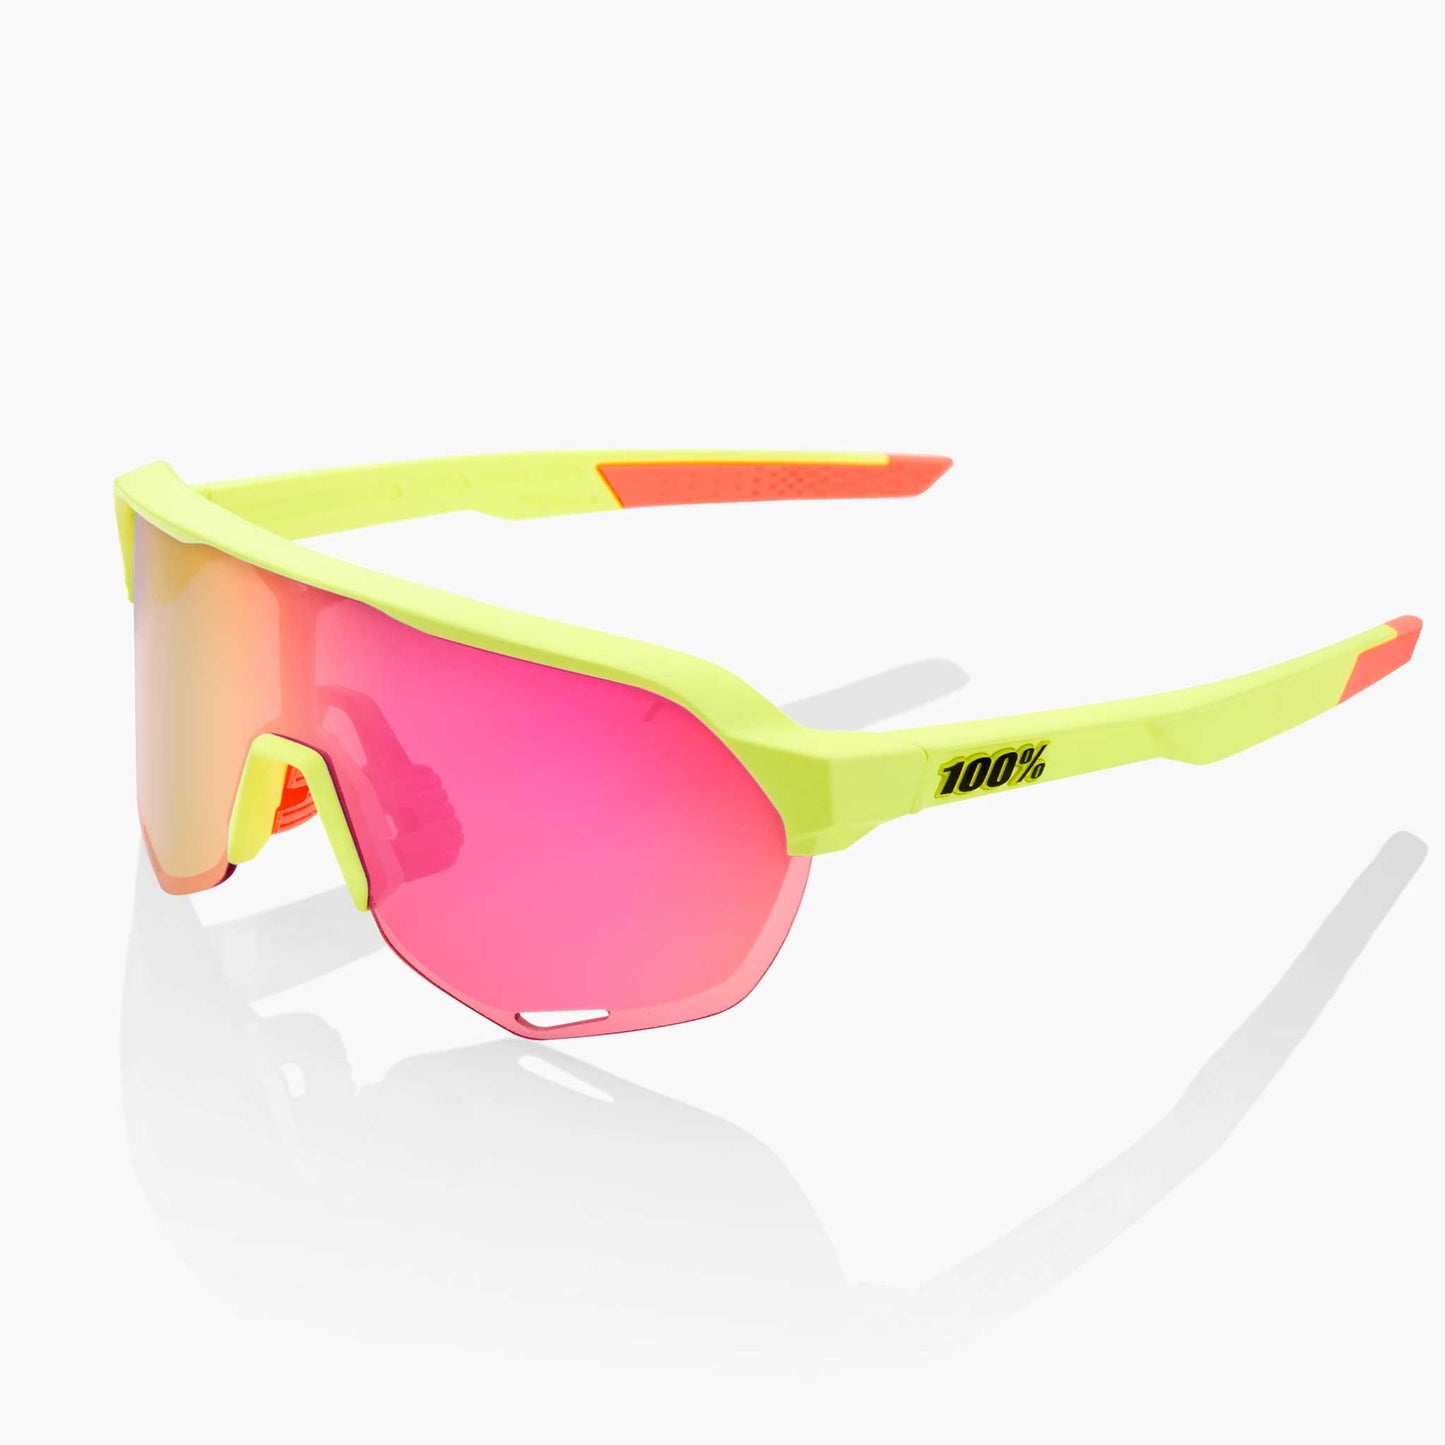 100% S2 Cycling Sunglasses Matt Washed Out Neon Yellow buy at Woolys Wheelsbike shop Australia with free delivery